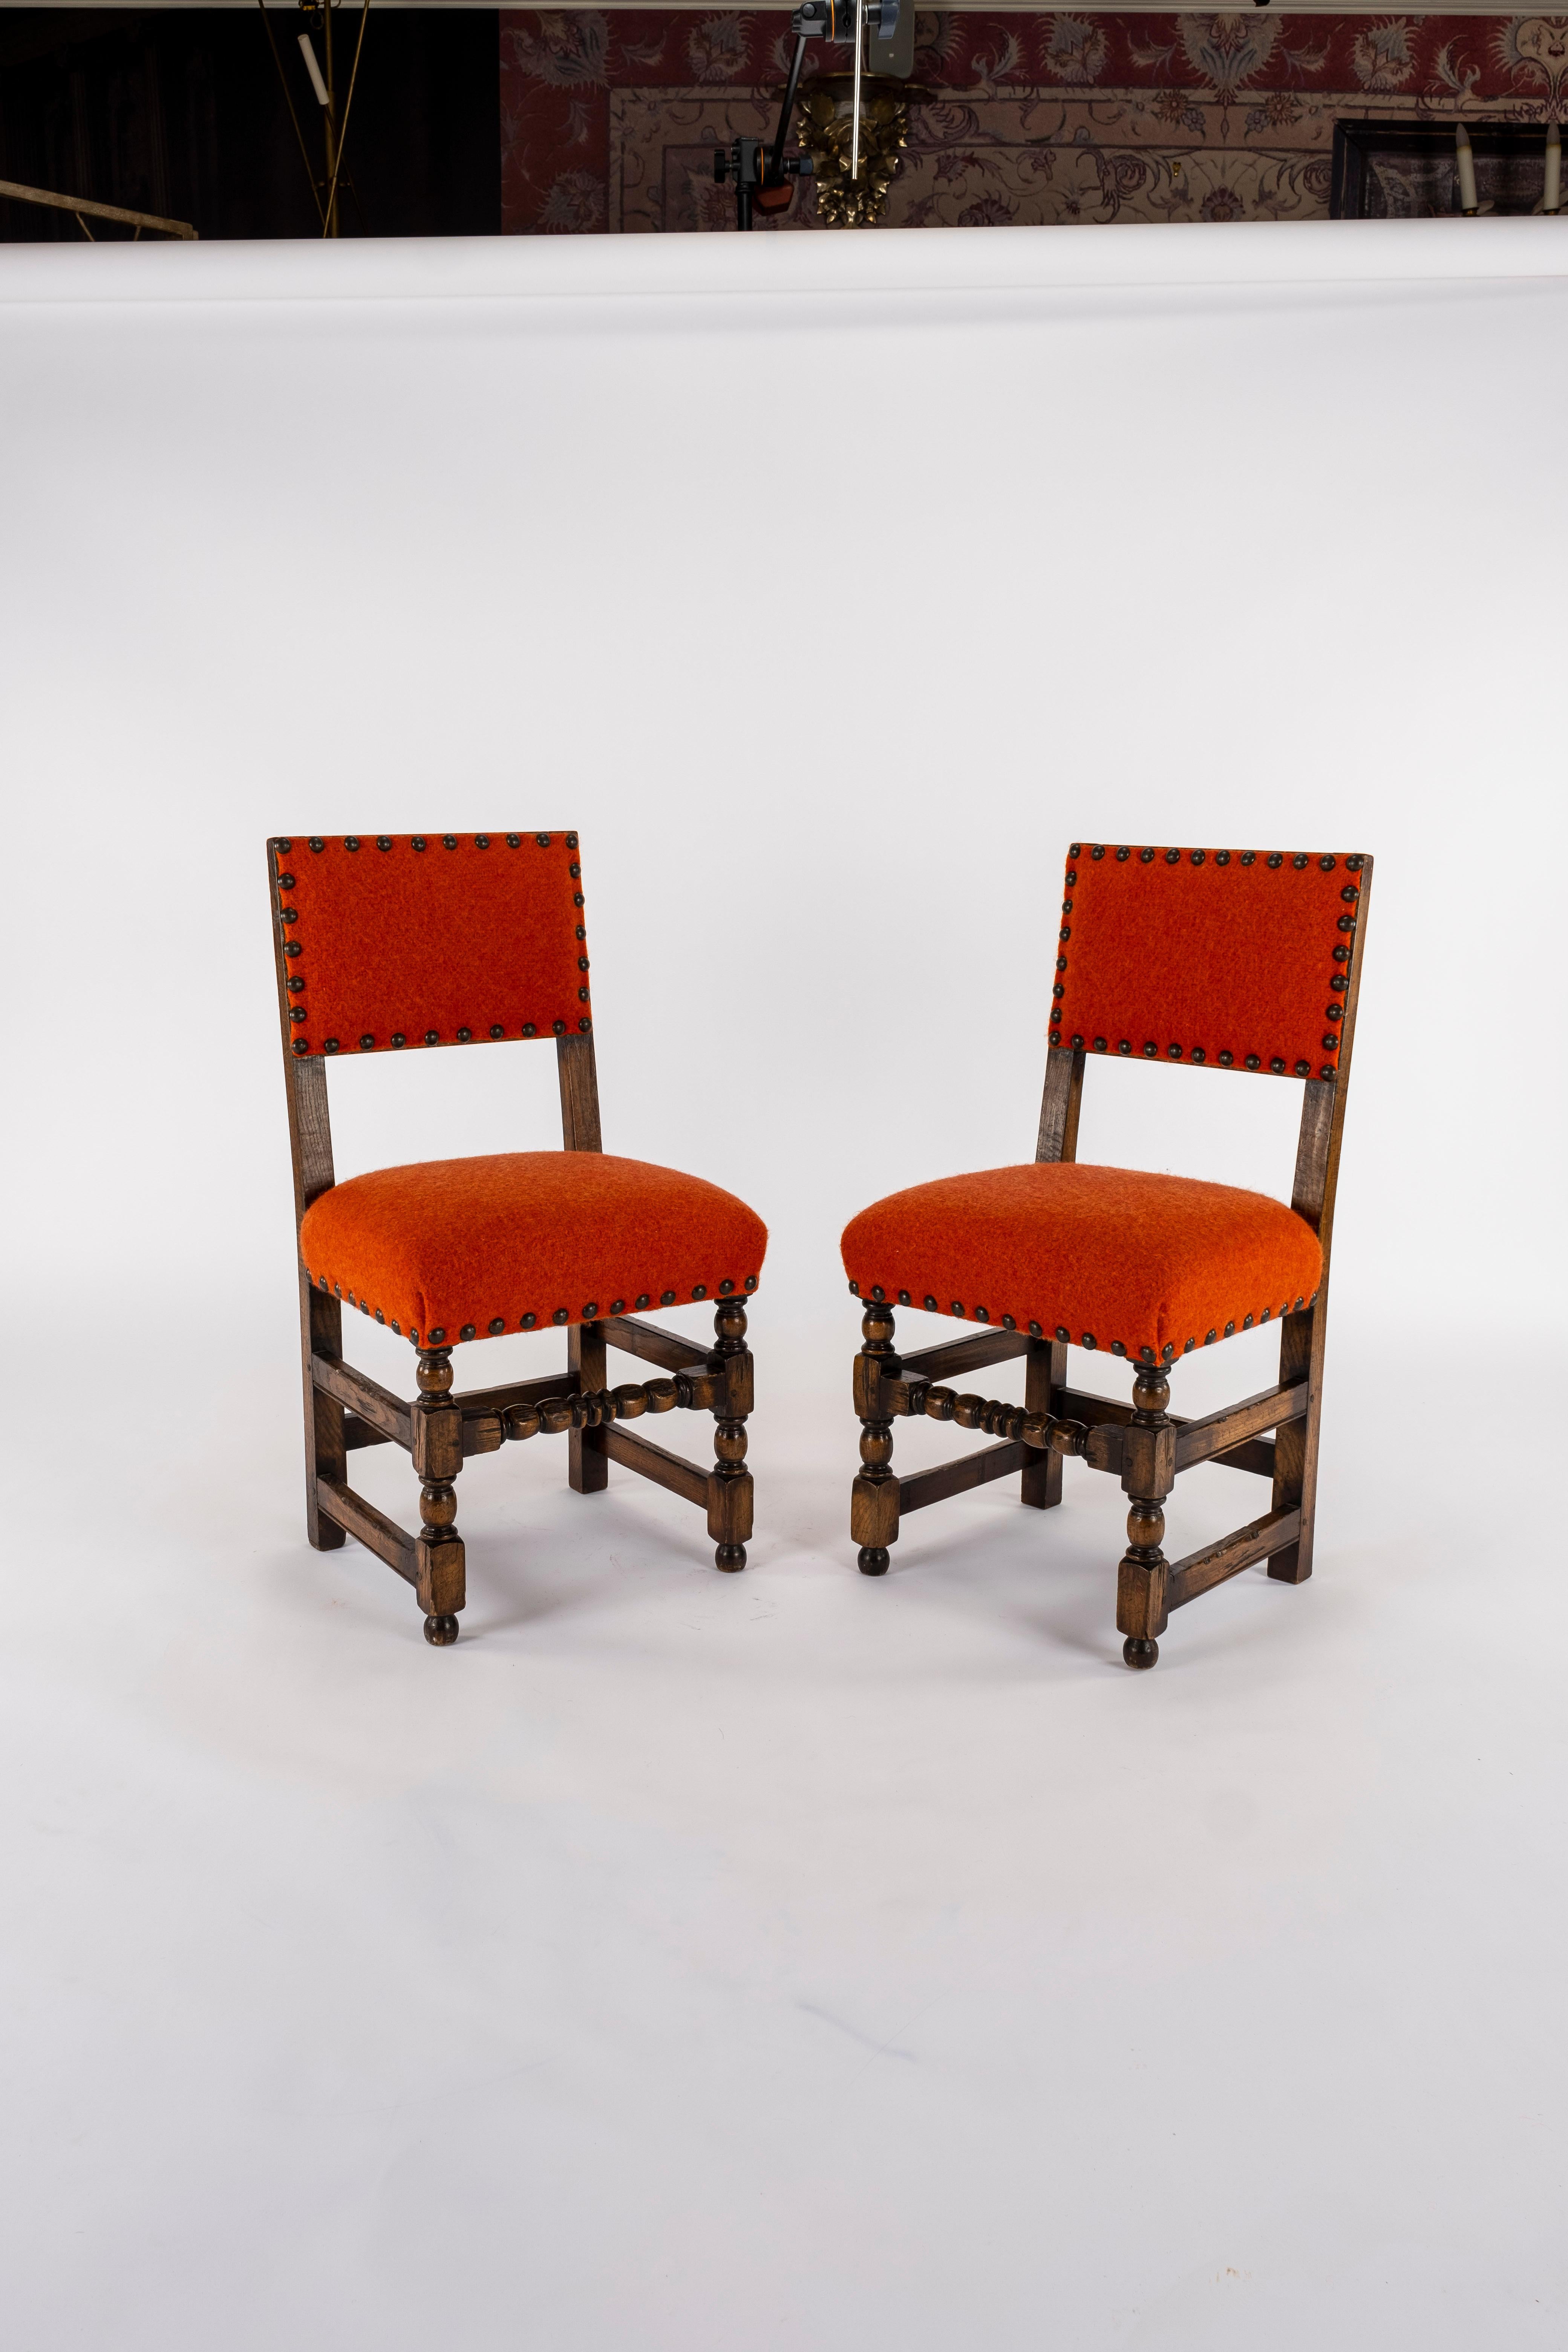 French Pair of 19th Century Orange Red Louis XIII Style Walnut Chairs